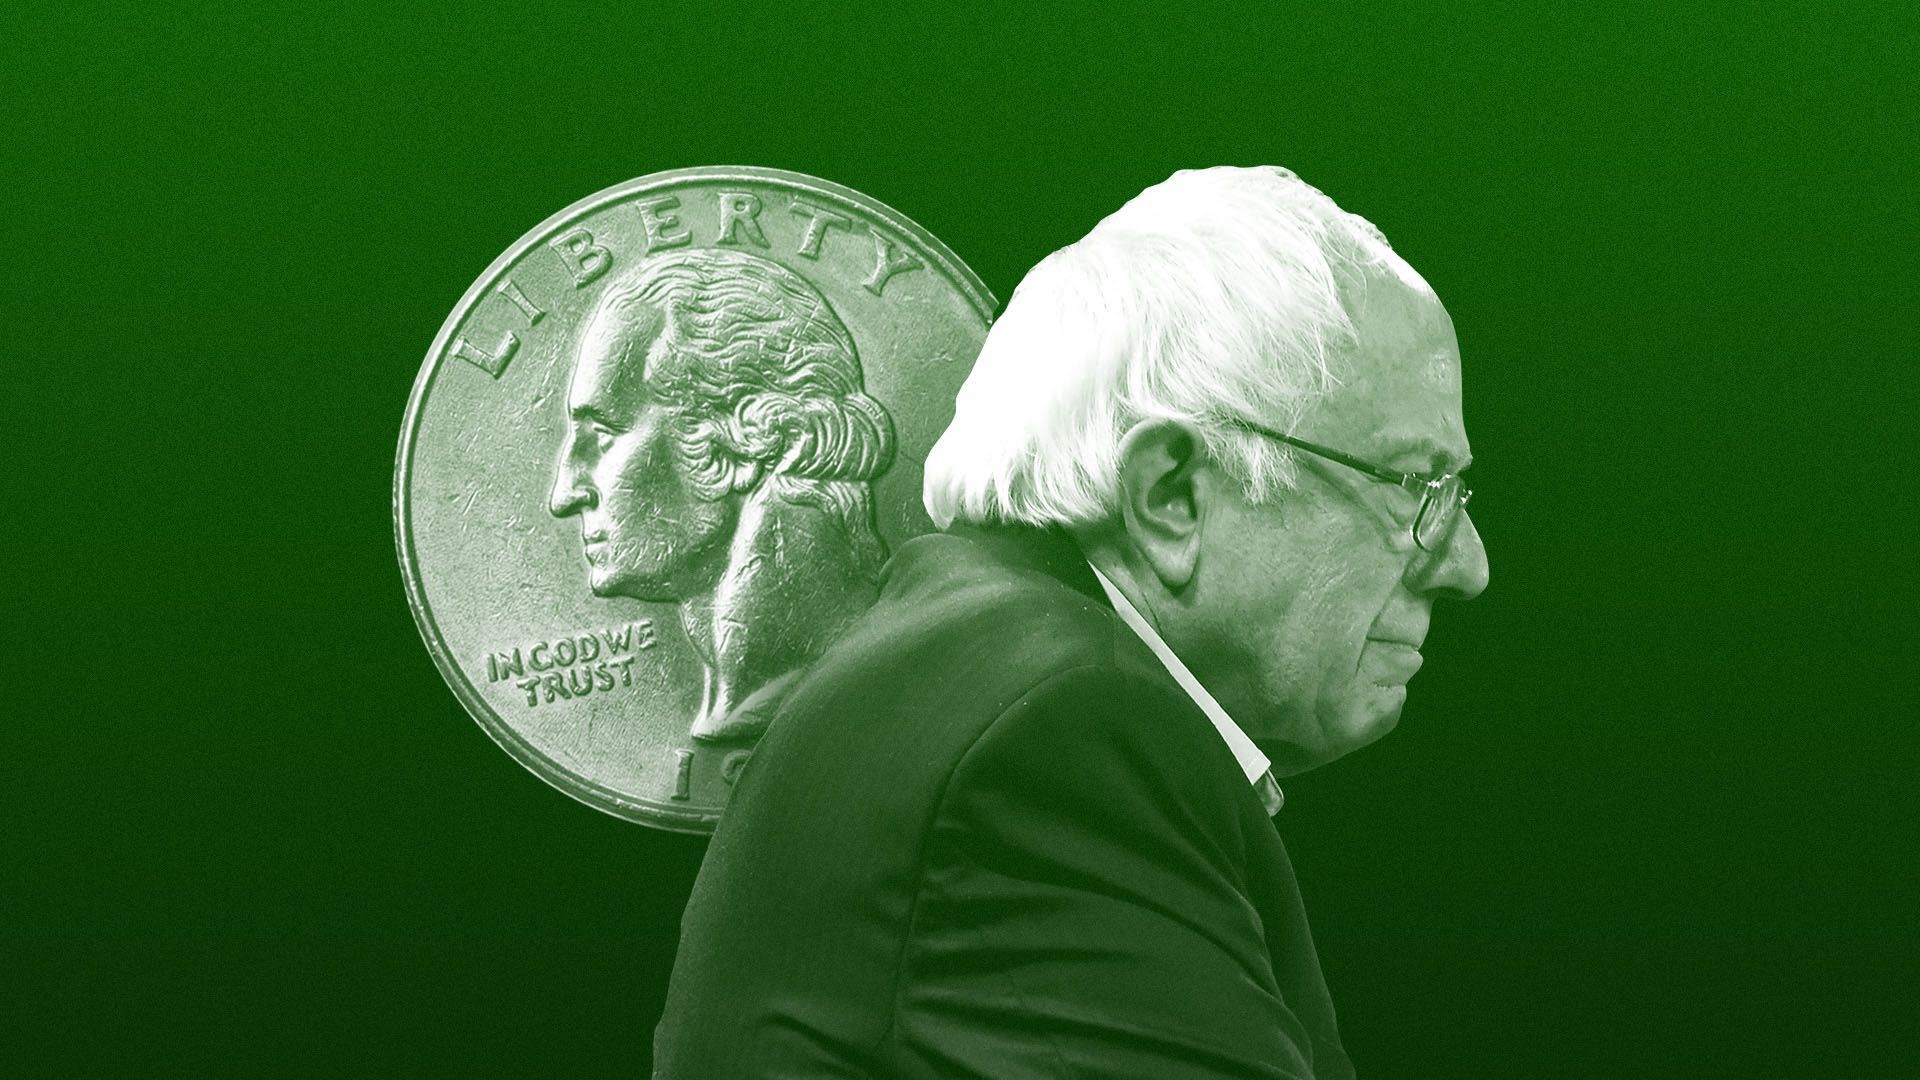 Bernie Sanders faces the opposite way of a coin. 